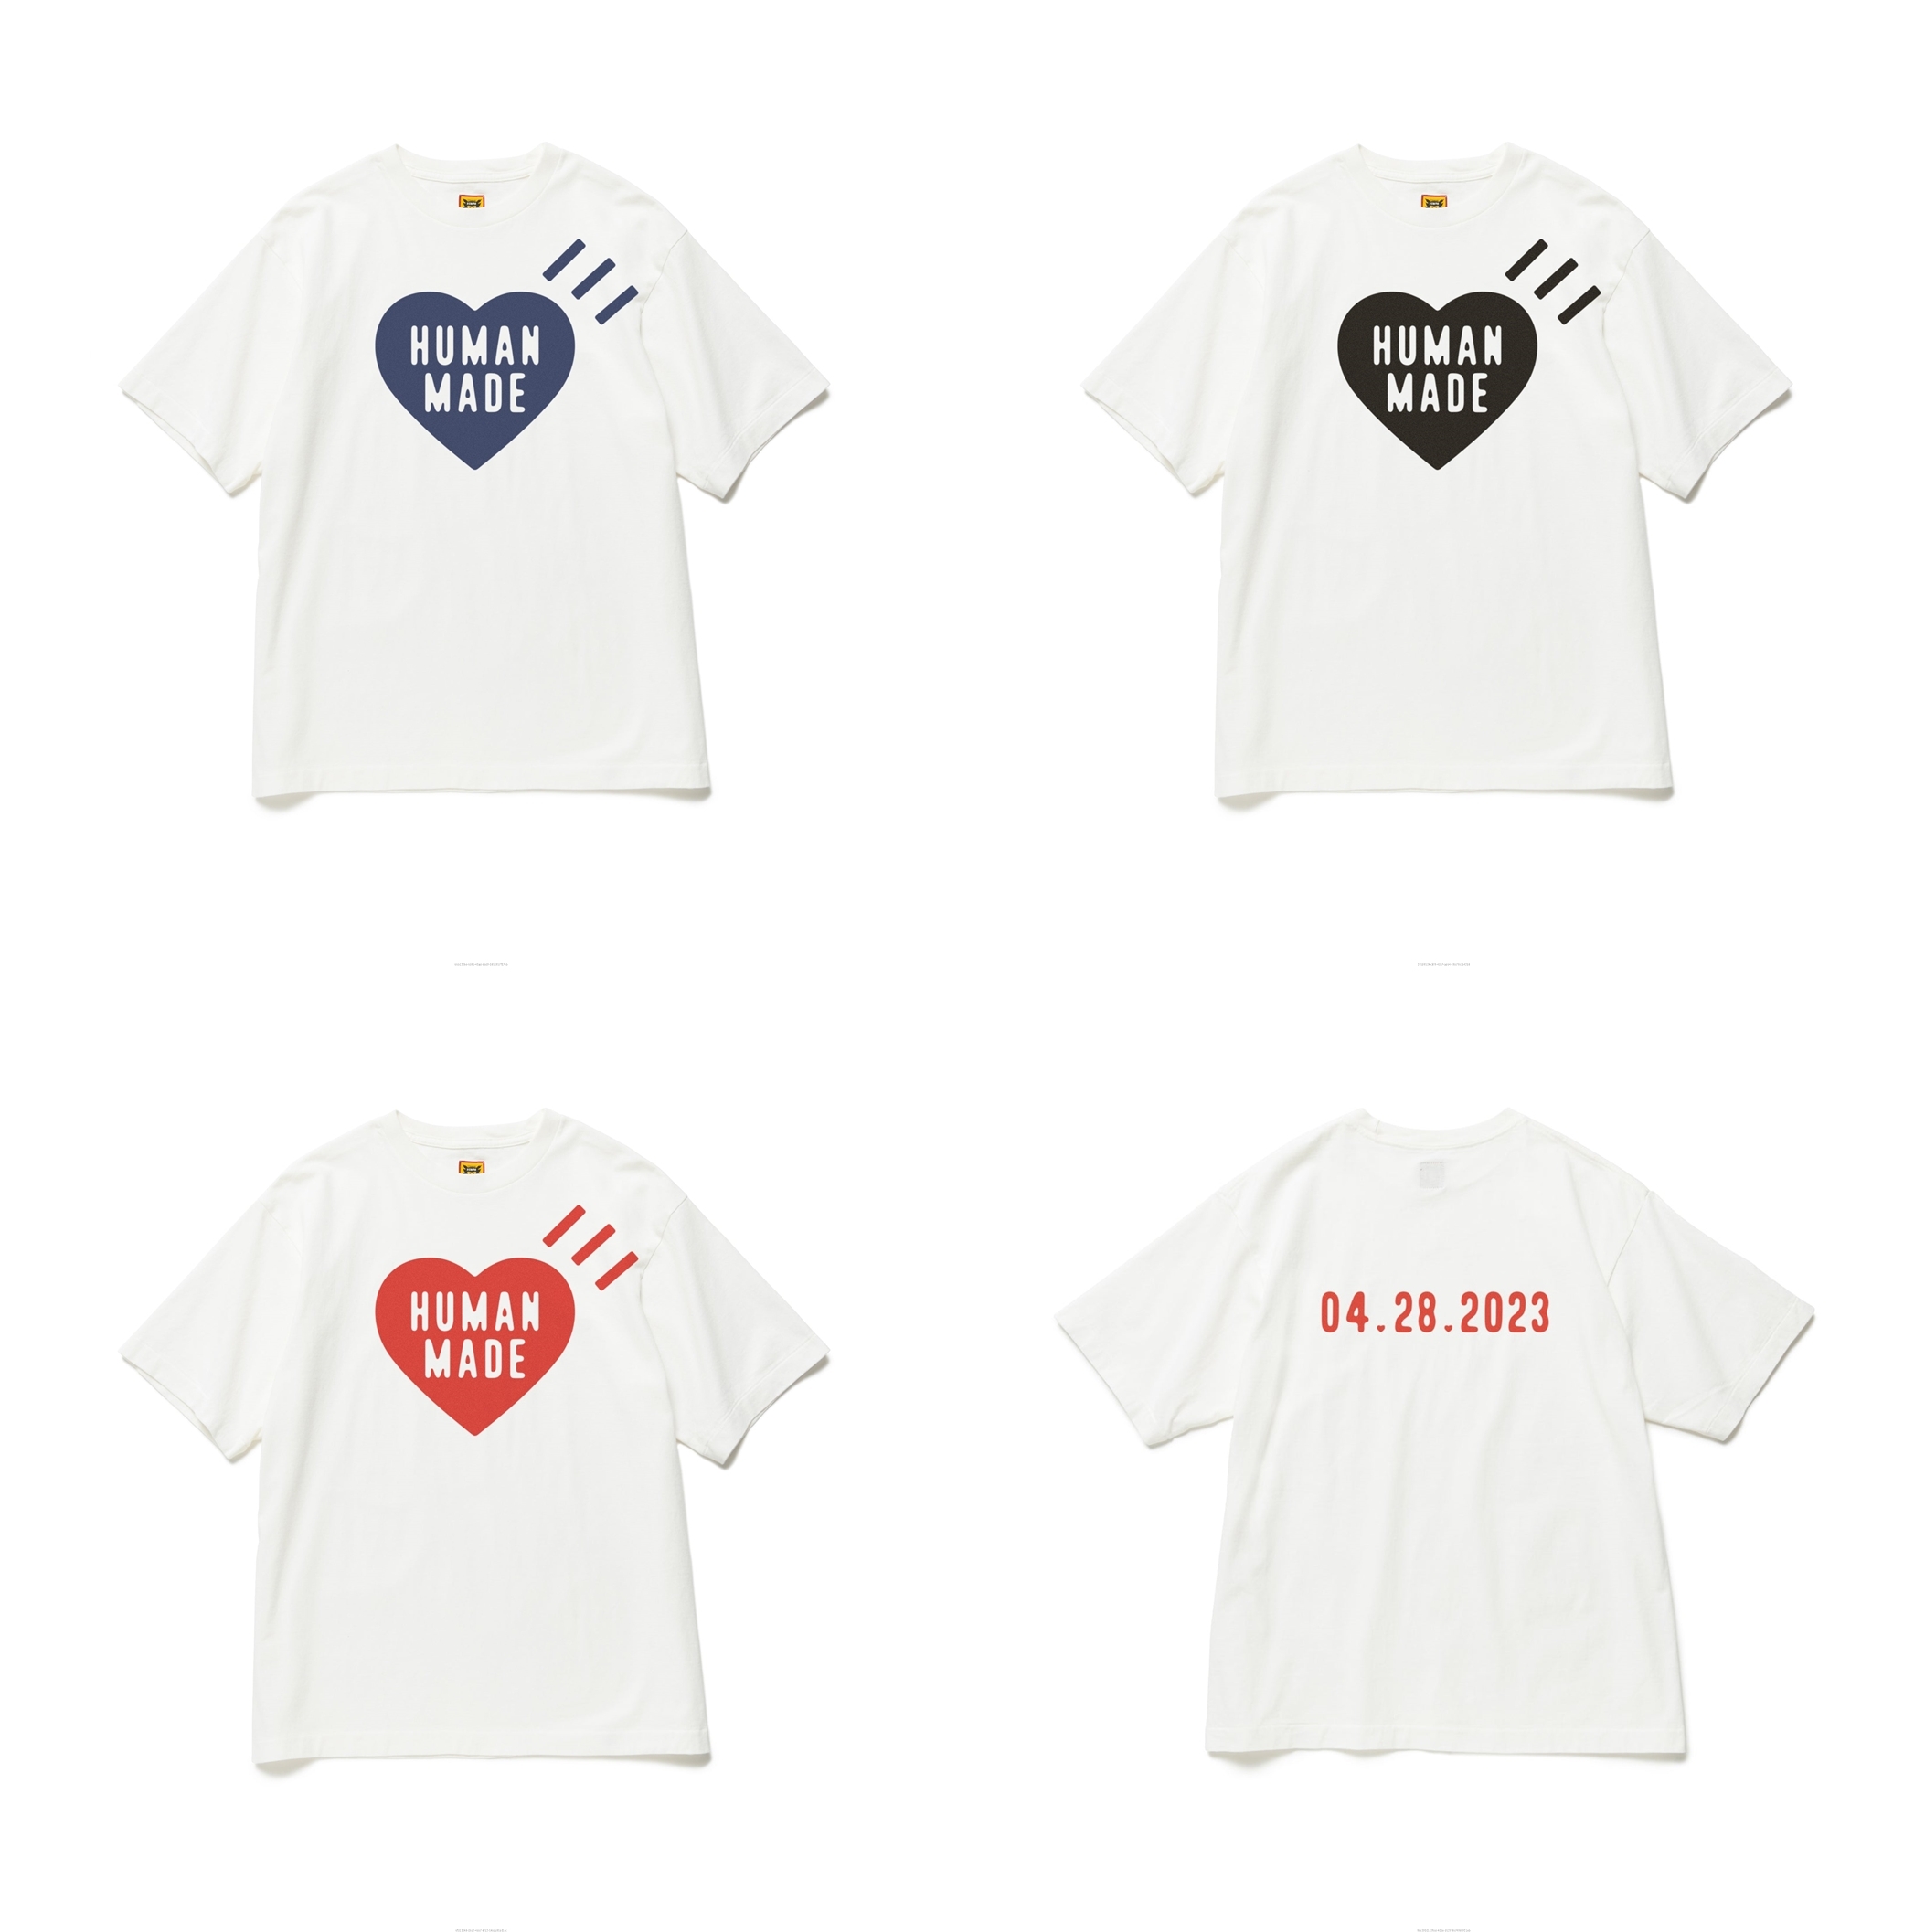 HUMAN MADE DAILY S/S T-SHIRT 0809 - Tシャツ/カットソー(半袖/袖なし)